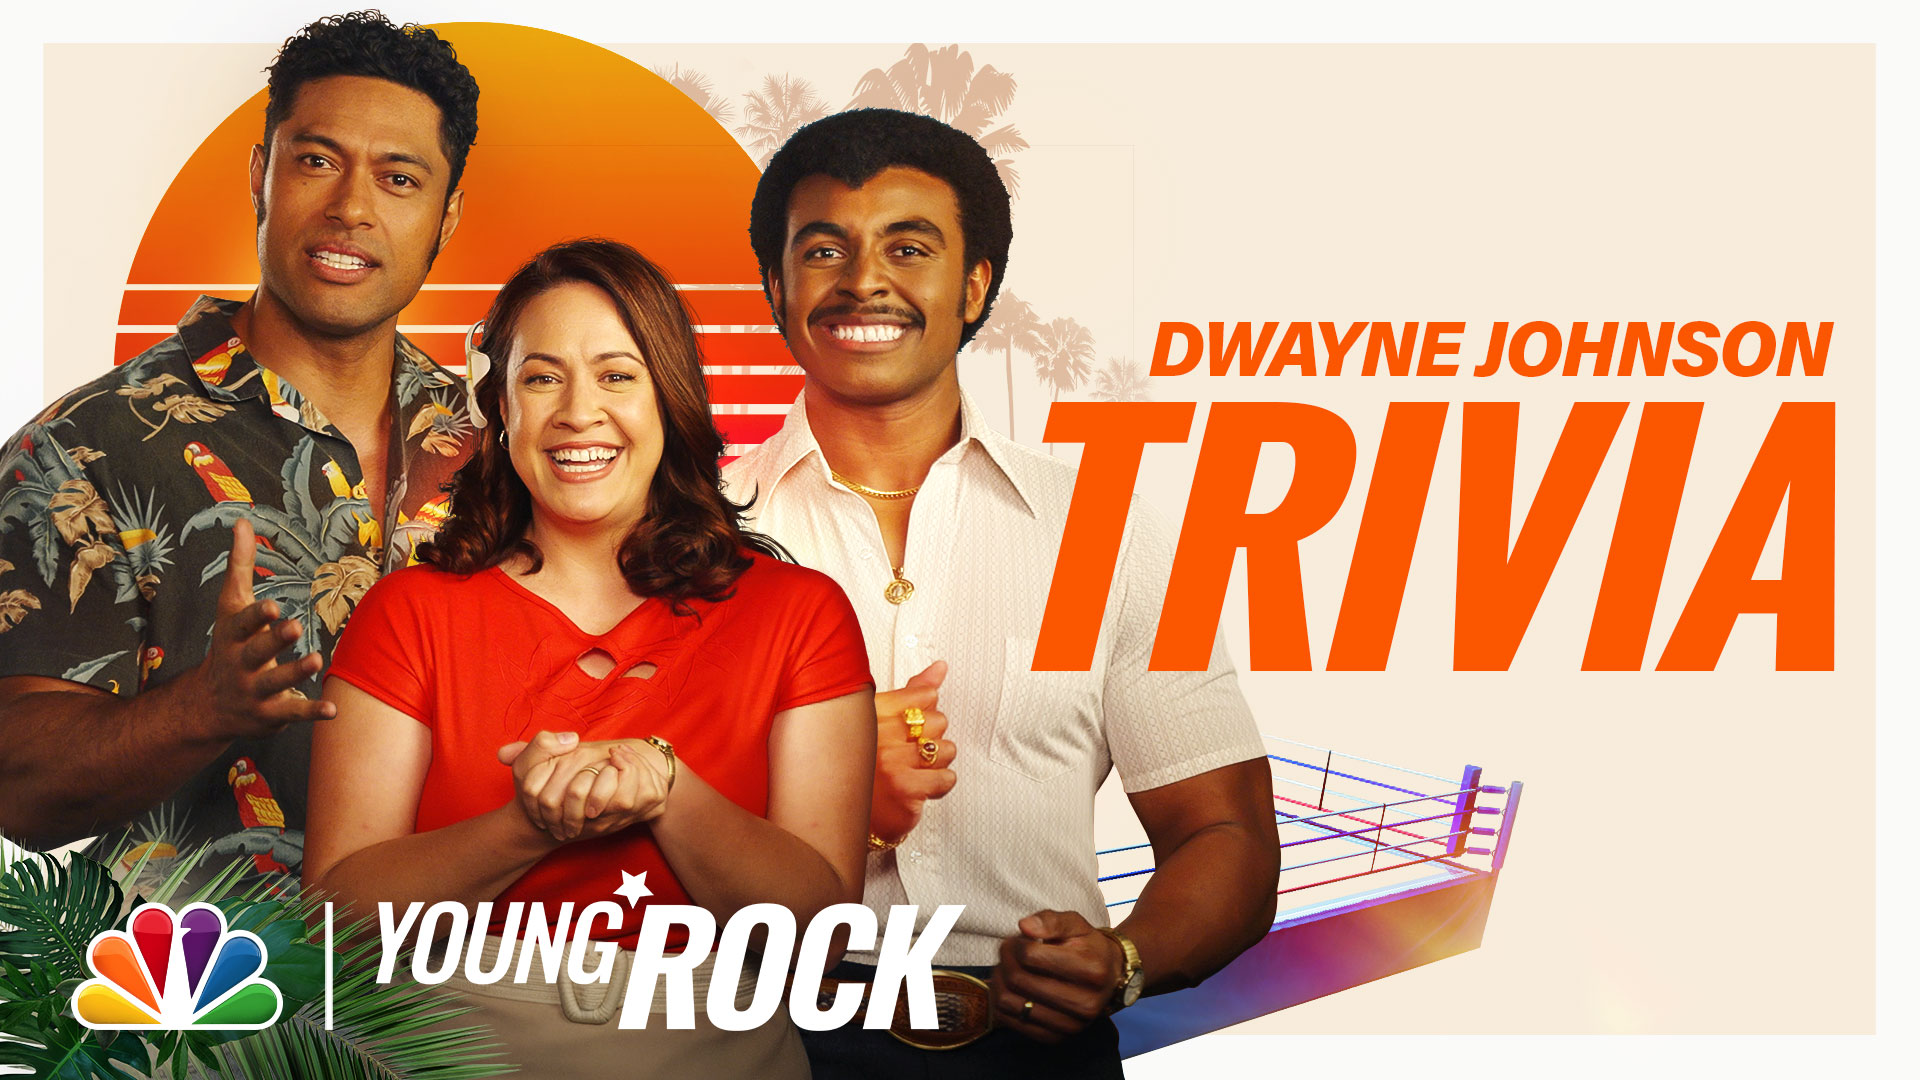 The Rock shares 1st trailer of new NBC sitcom 'Young Rock